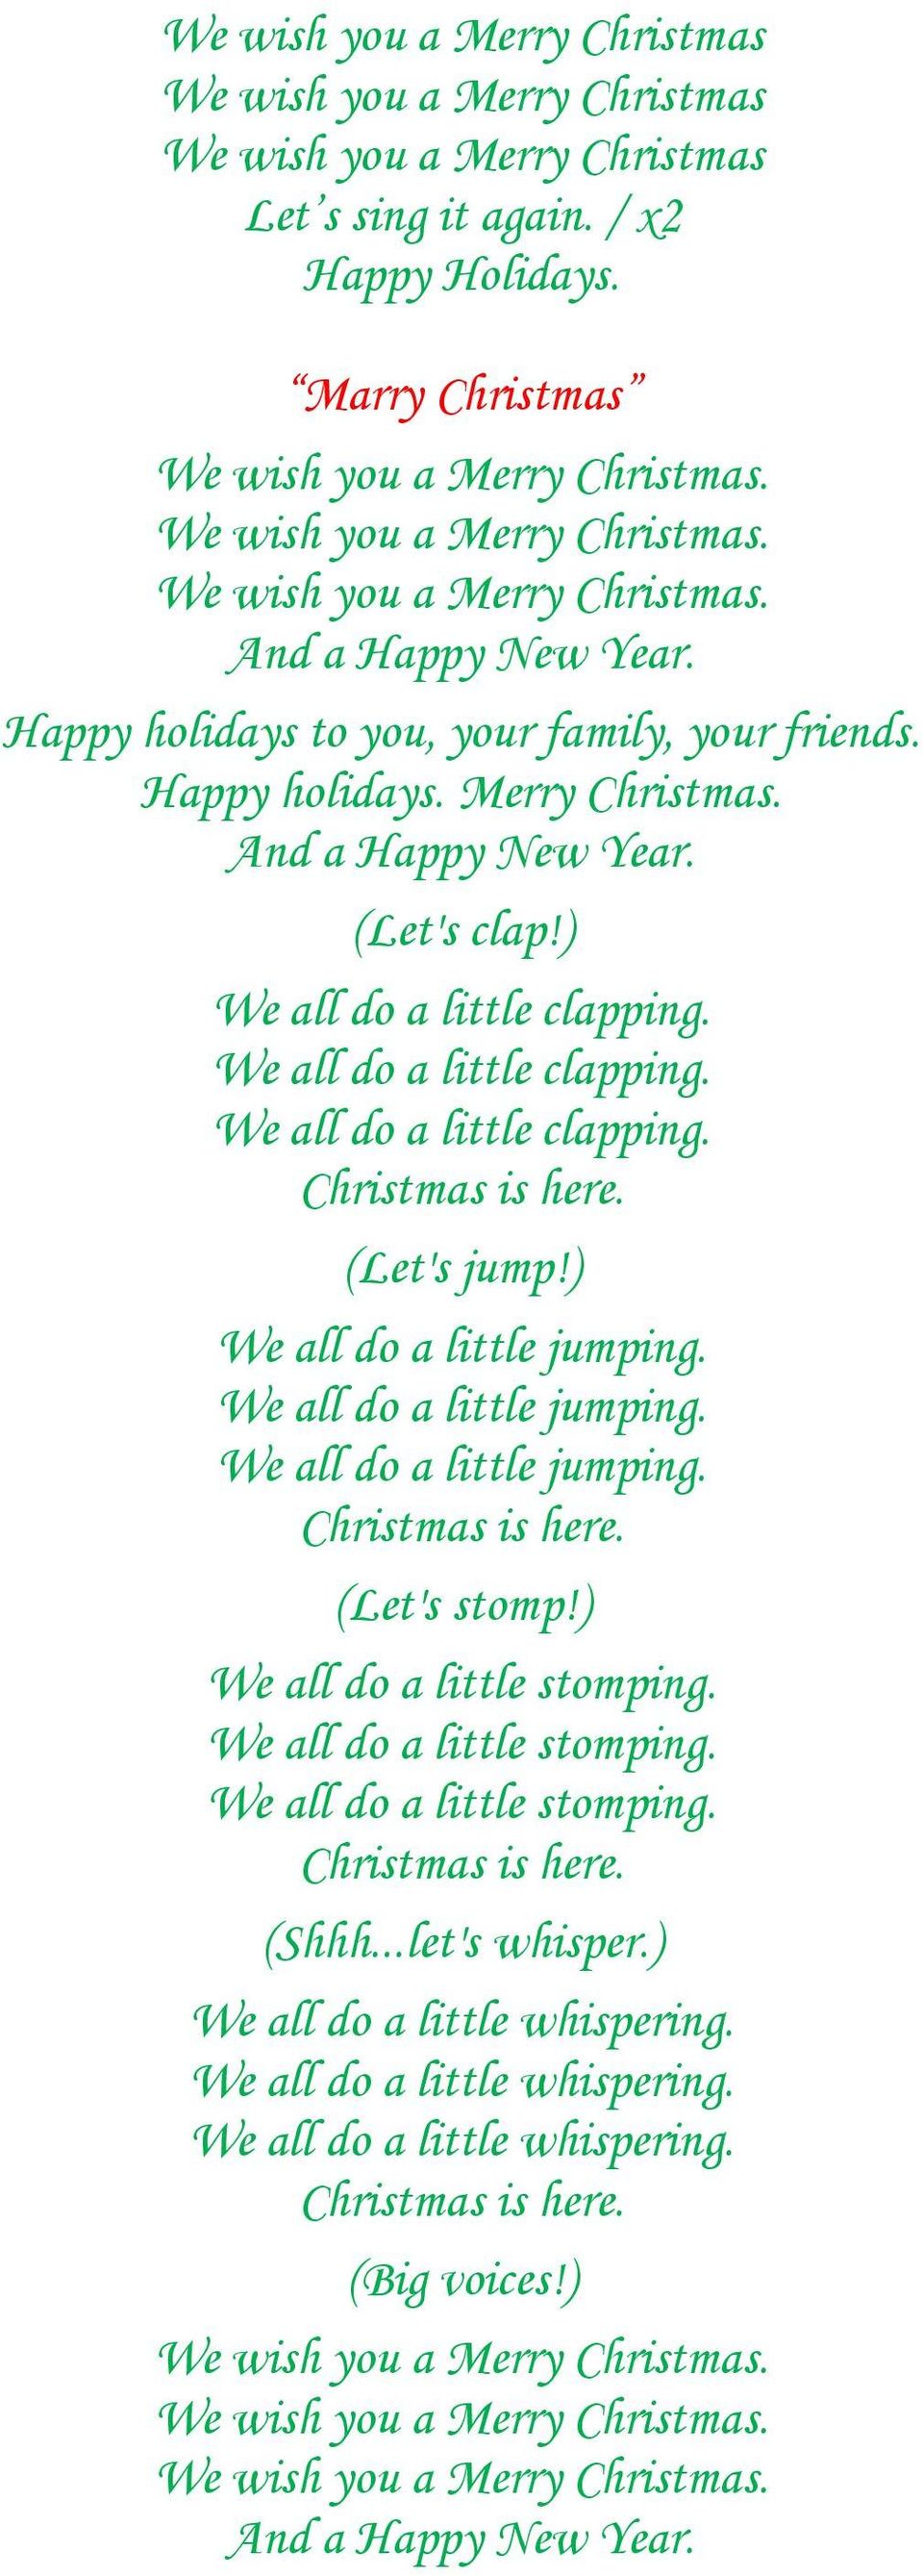 ) We all do a little clapping. We all do a little clapping. We all do a little clapping. Christmas is here. (Let's jump!) We all do a little jumping. We all do a little jumping. We all do a little jumping. Christmas is here. (Let's stomp!